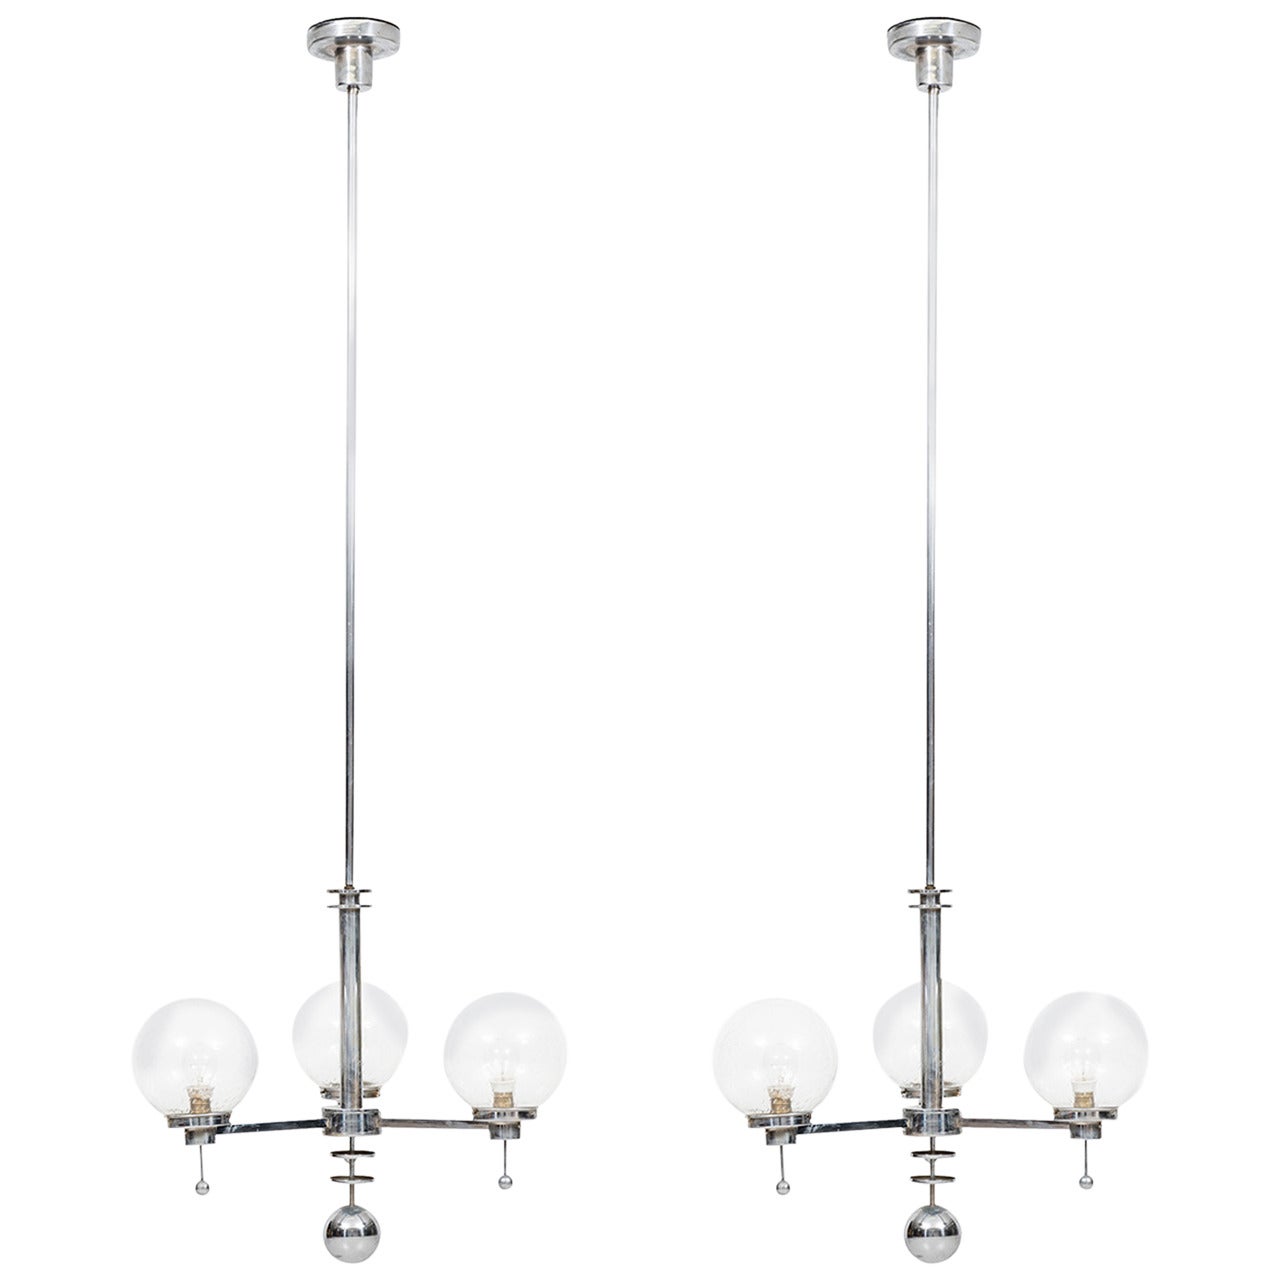 Pair of Big Art Deco Ceiling Lamps Chandelier in Chromed Steel Glass Bowls For Sale